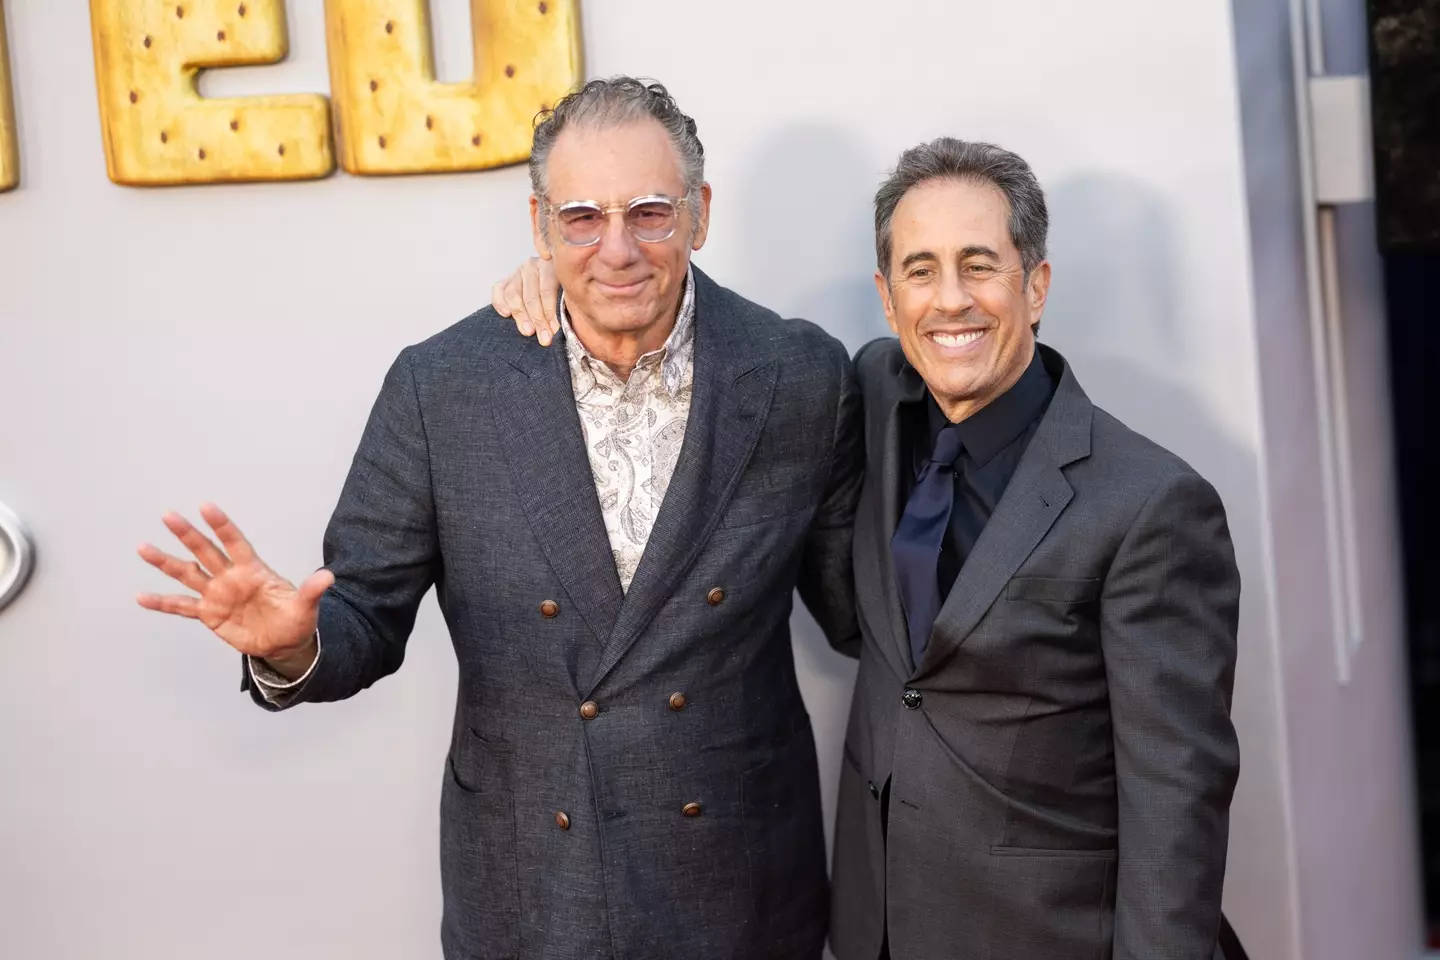 Richards has been supported by Jerry Seinfeld over the years. (Matt Winkelmeyer/WireImage)